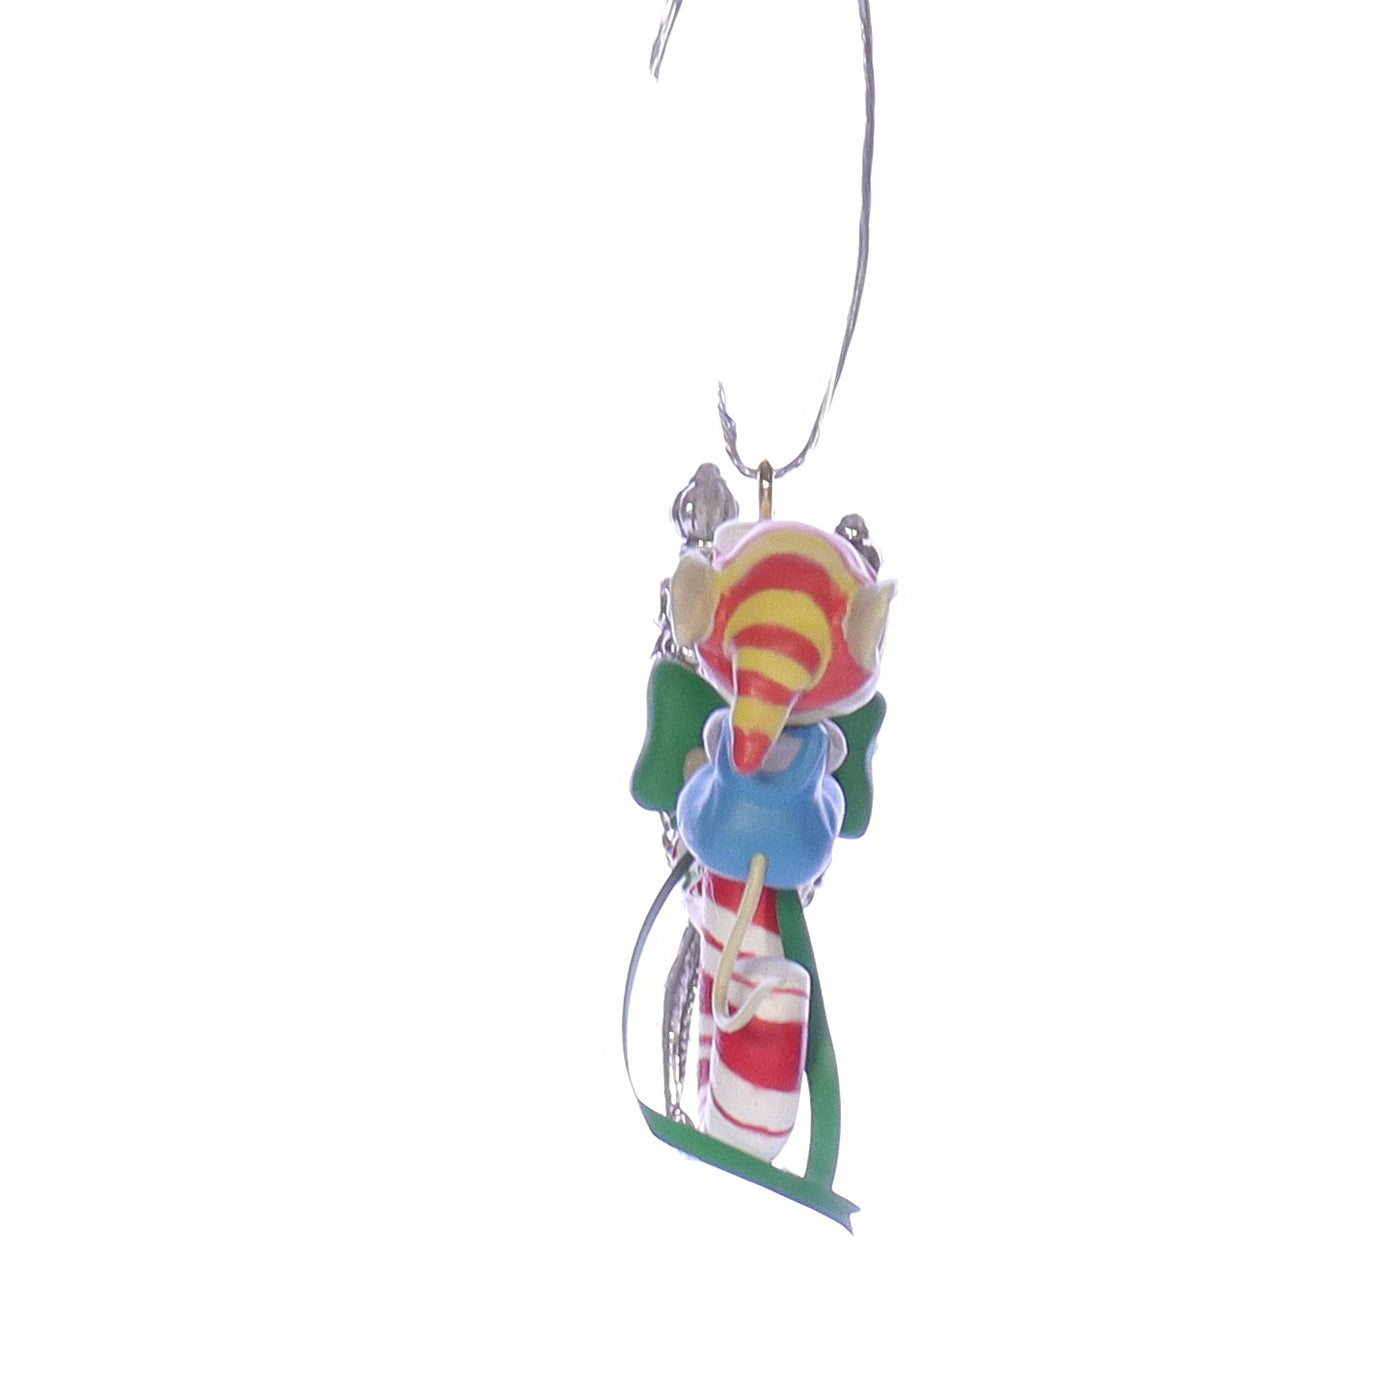 Enesco_Treasury_of_Christmas_Ornaments_830488_Tie-dings_of_Joy_Mouse_Ornament_1991 Left Side View